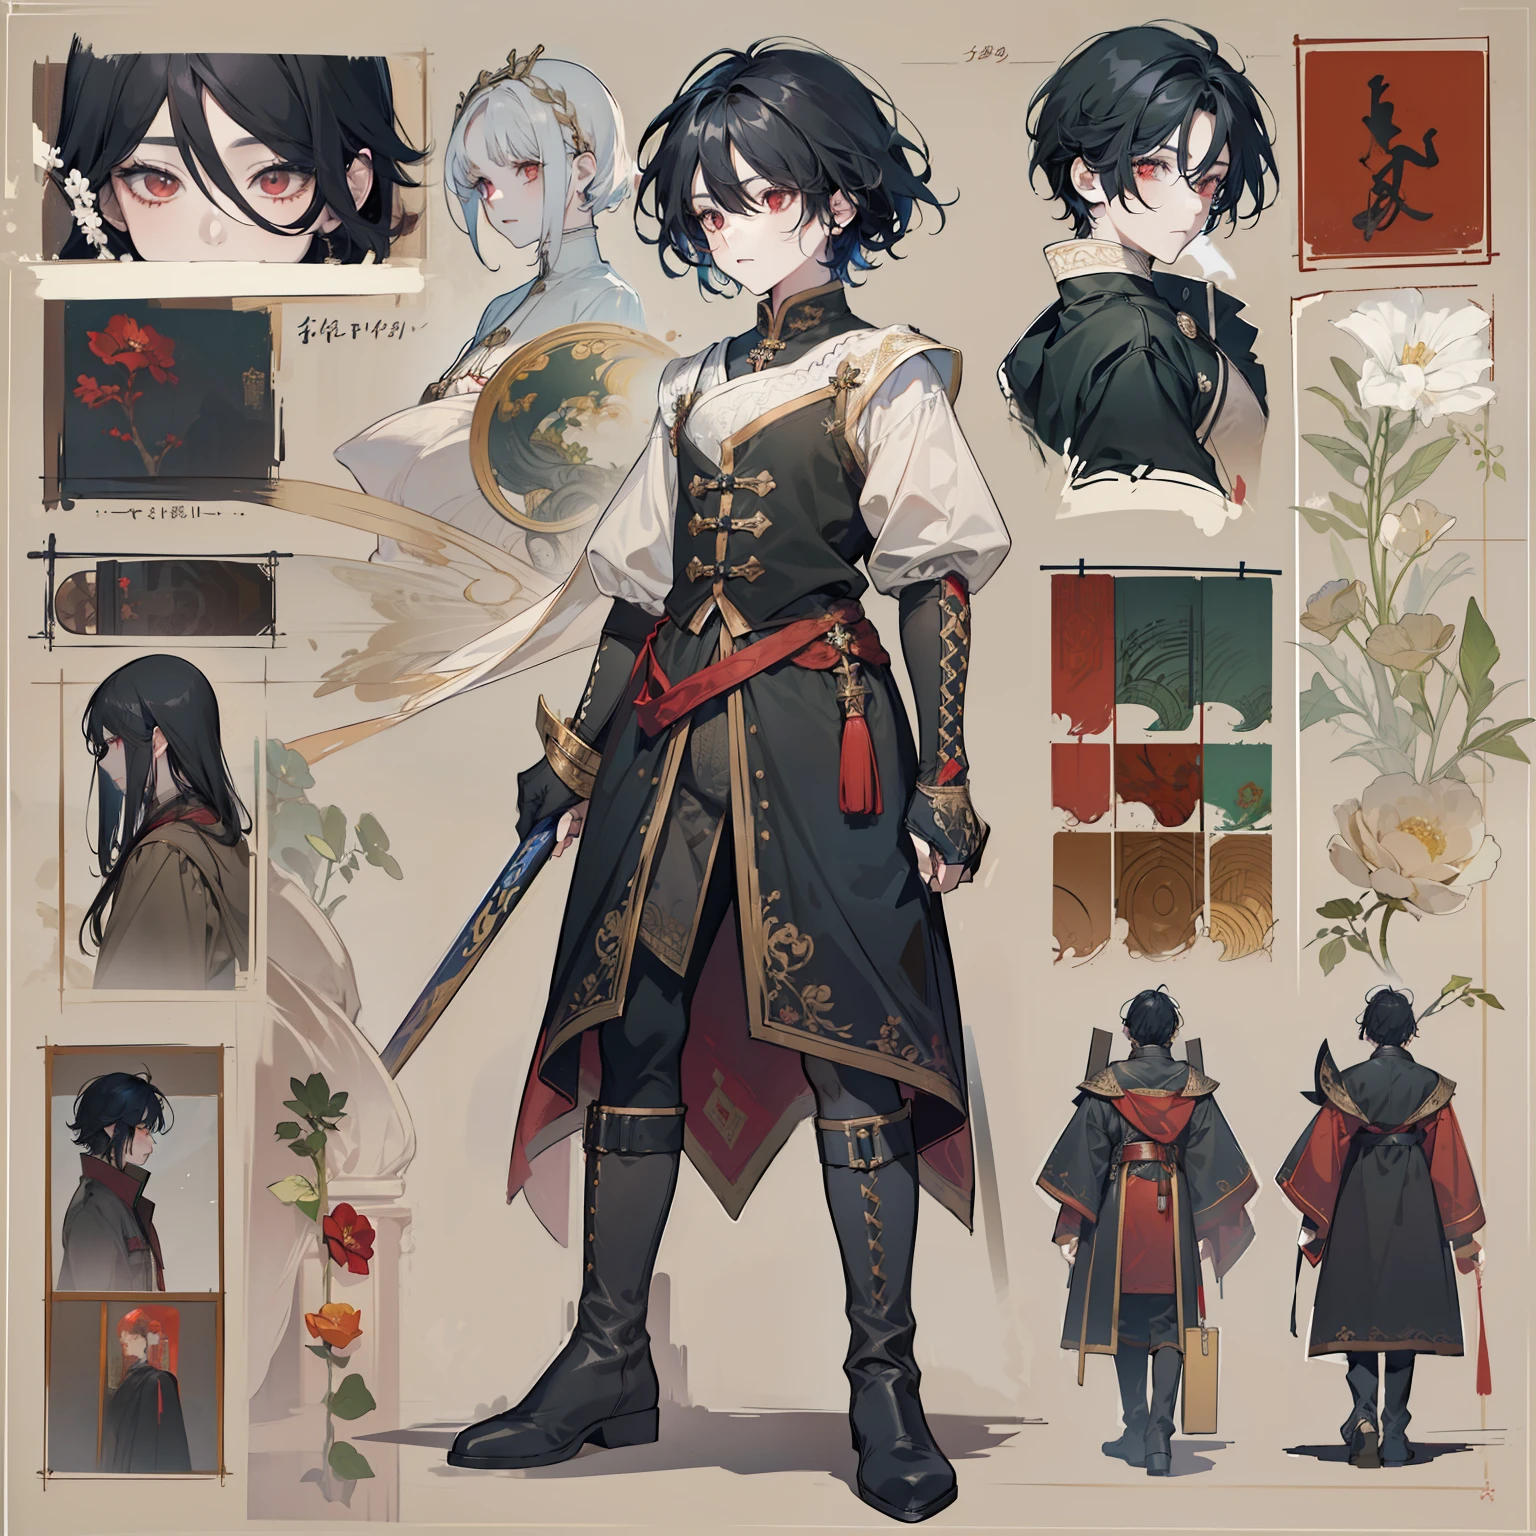 1 boy, solo, black hair, square, Bob hairstyle, bean, shoulder-length hair, red eyes, shirt, high boots, Lightweight clothing, medieval theme, looking at viewer, fantasy art, beautiful painting, guwaika style, epic exquisite character art, stunning characters, man, lean (reference sheet:1.5)